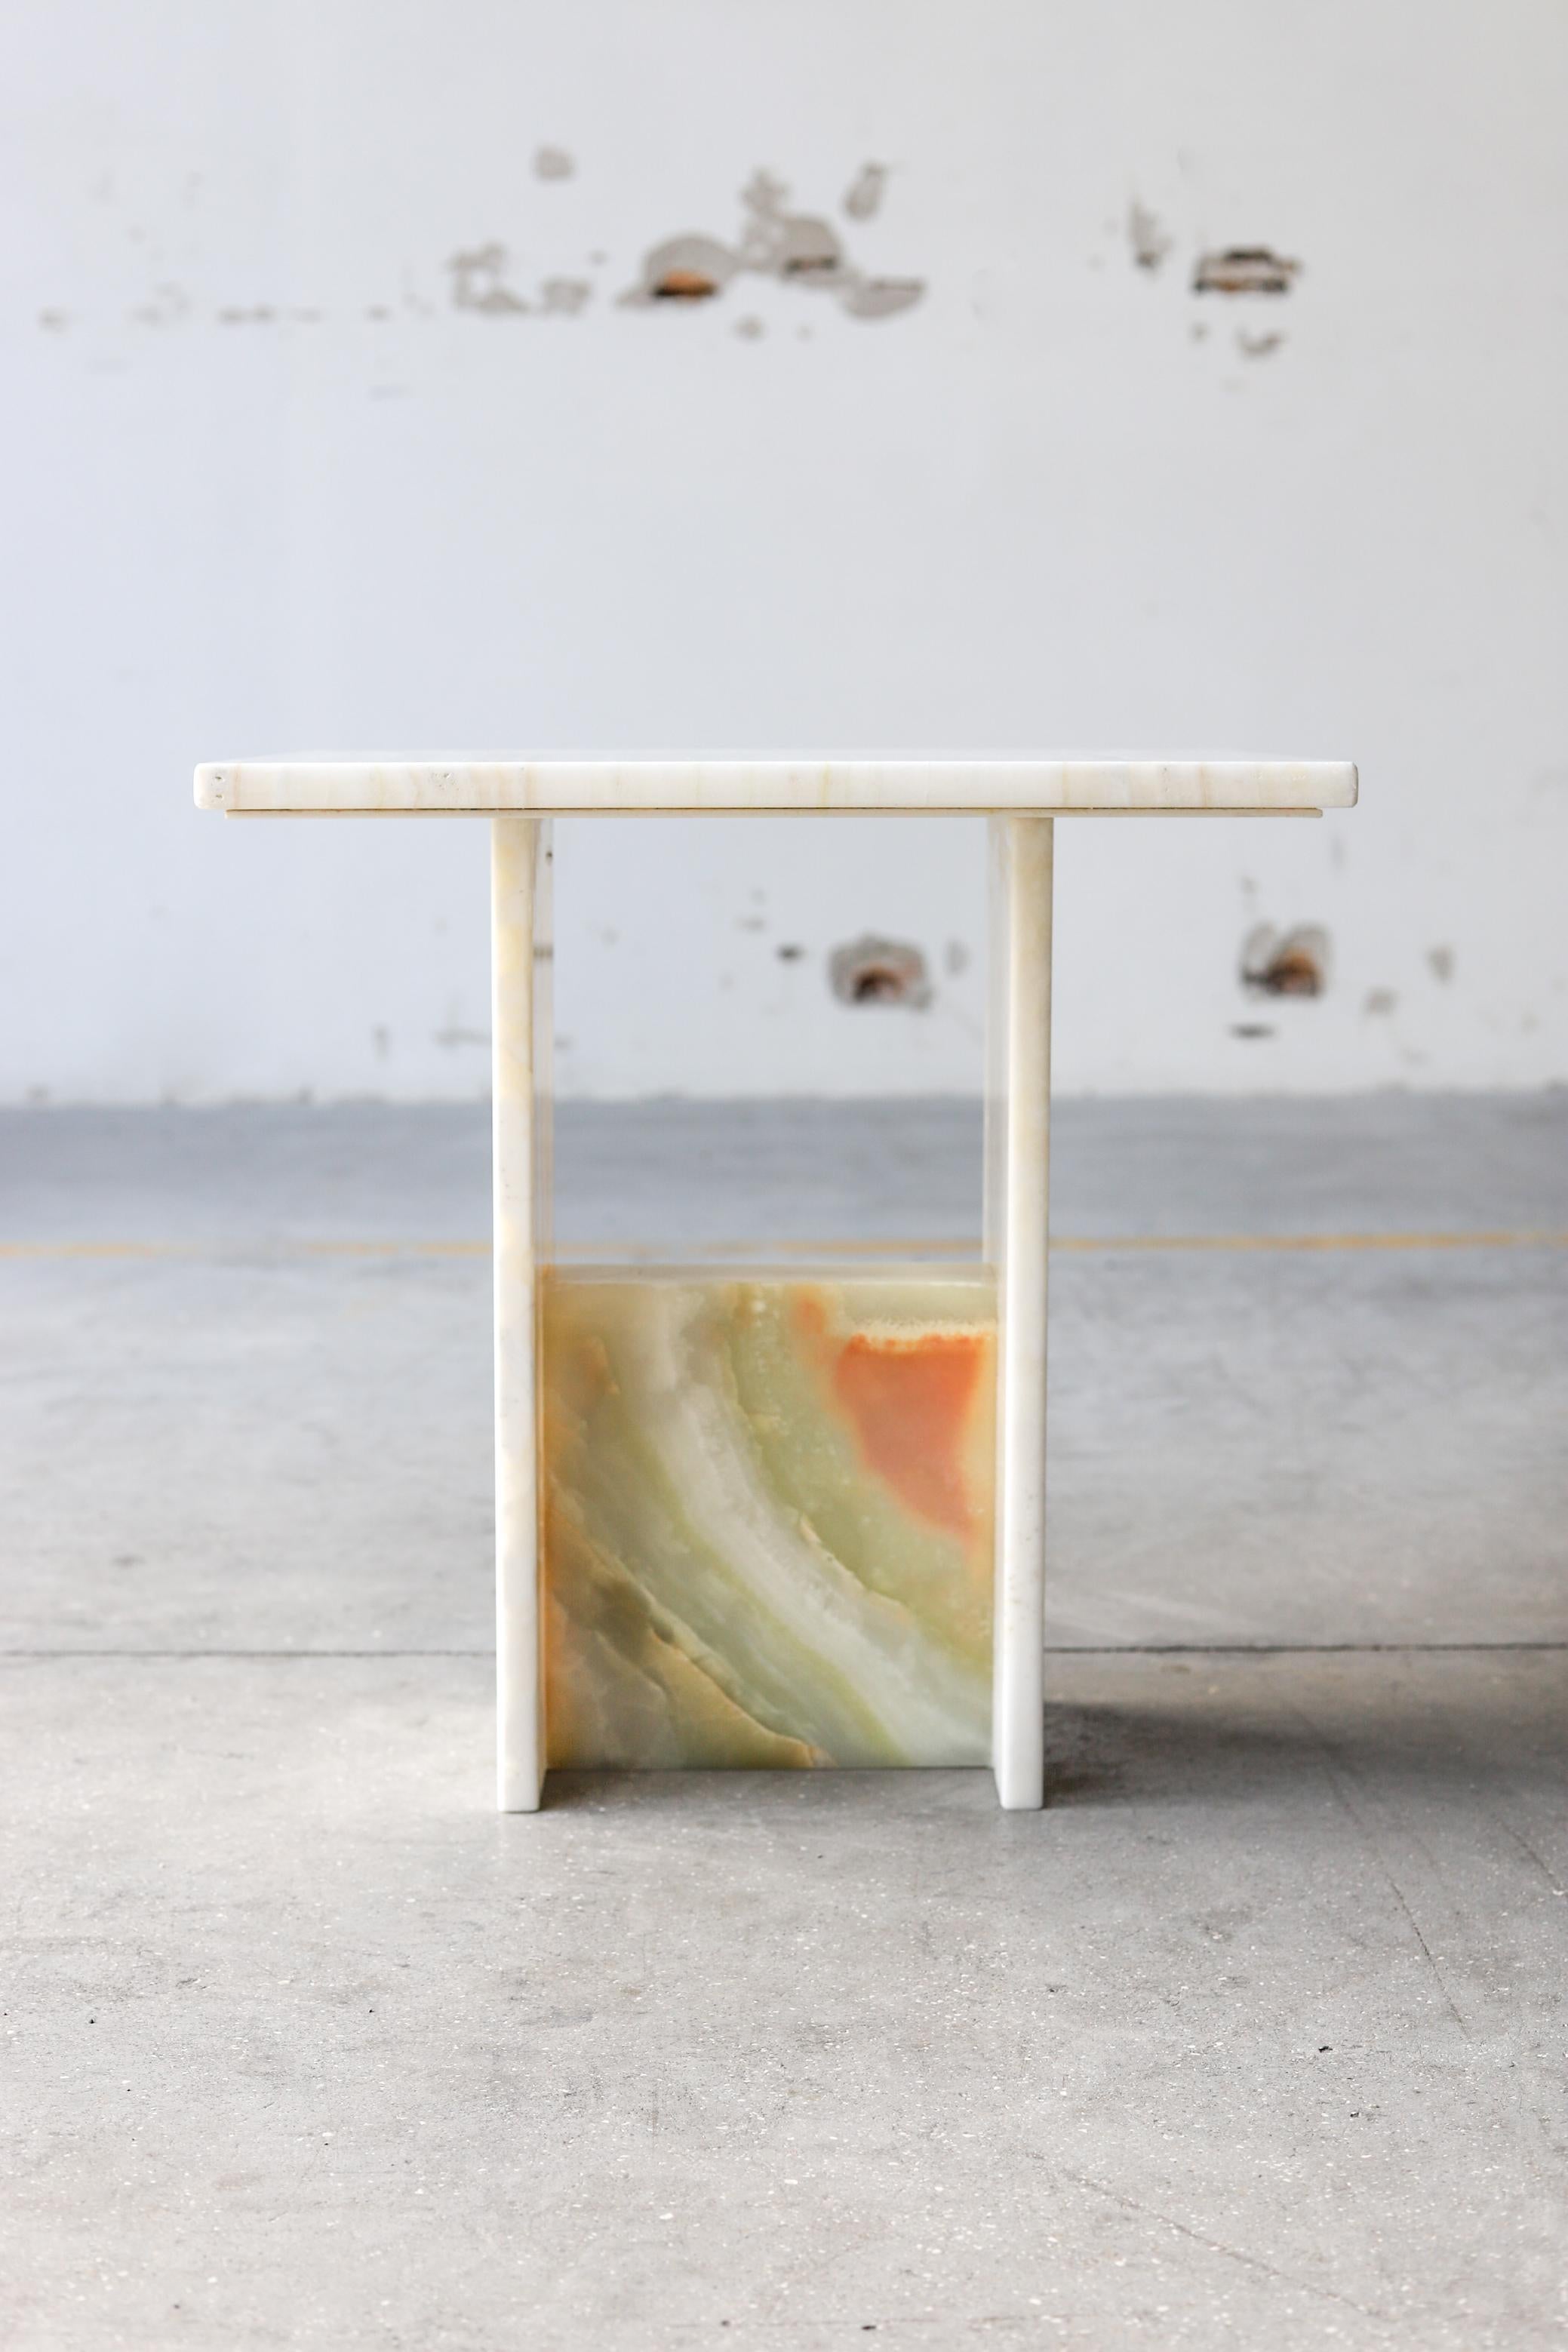 SST016-1 side table by Stone Stackers
Limited edition of 5 products.
Dimensions: W 39 x D 48 x H 48 cm.
Materials: Marble Structure: Onyx Ivory, Marble Base: Onyx Jade Green.
Weight: 29 kg.

This side table is part of a set of two pieces. It